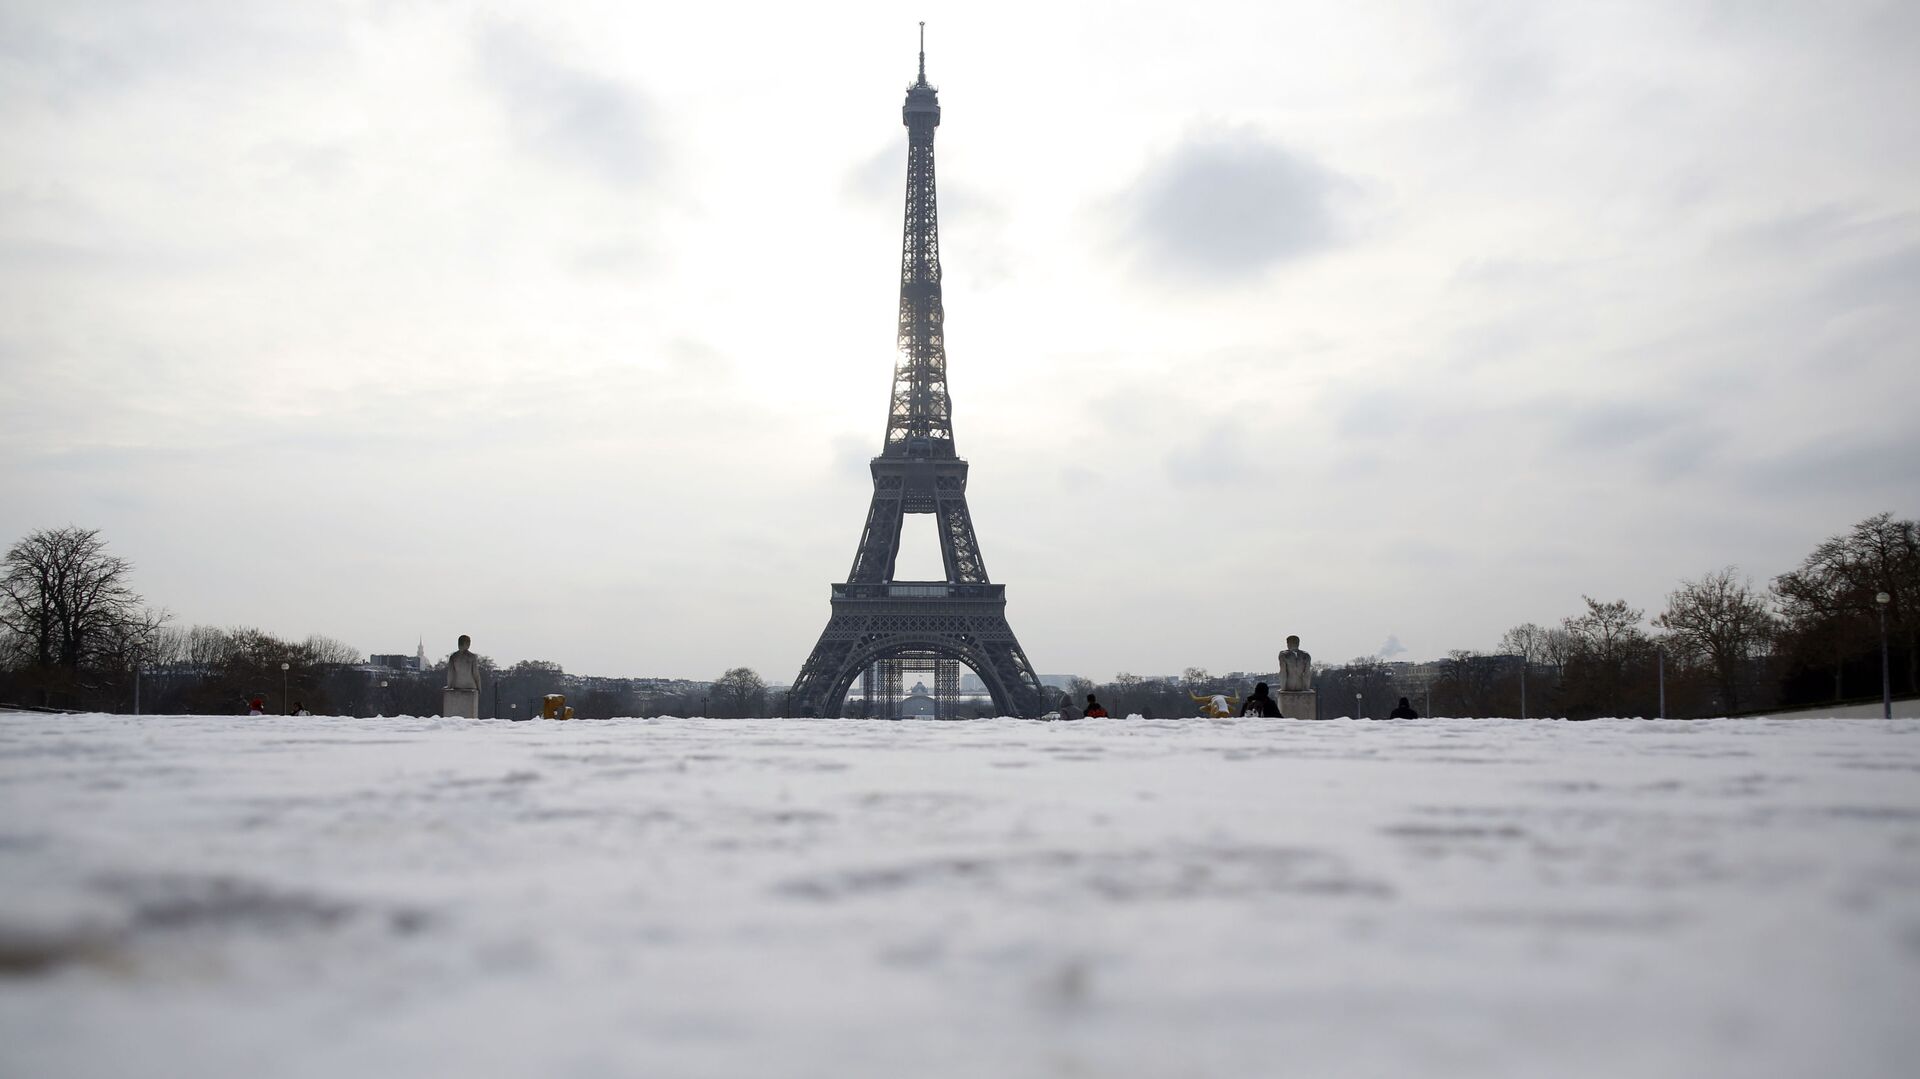 Snow covers the Trocadero gardens with the Eiffel Tower in the background, in Paris, 10 February 2021 - Sputnik International, 1920, 17.02.2021